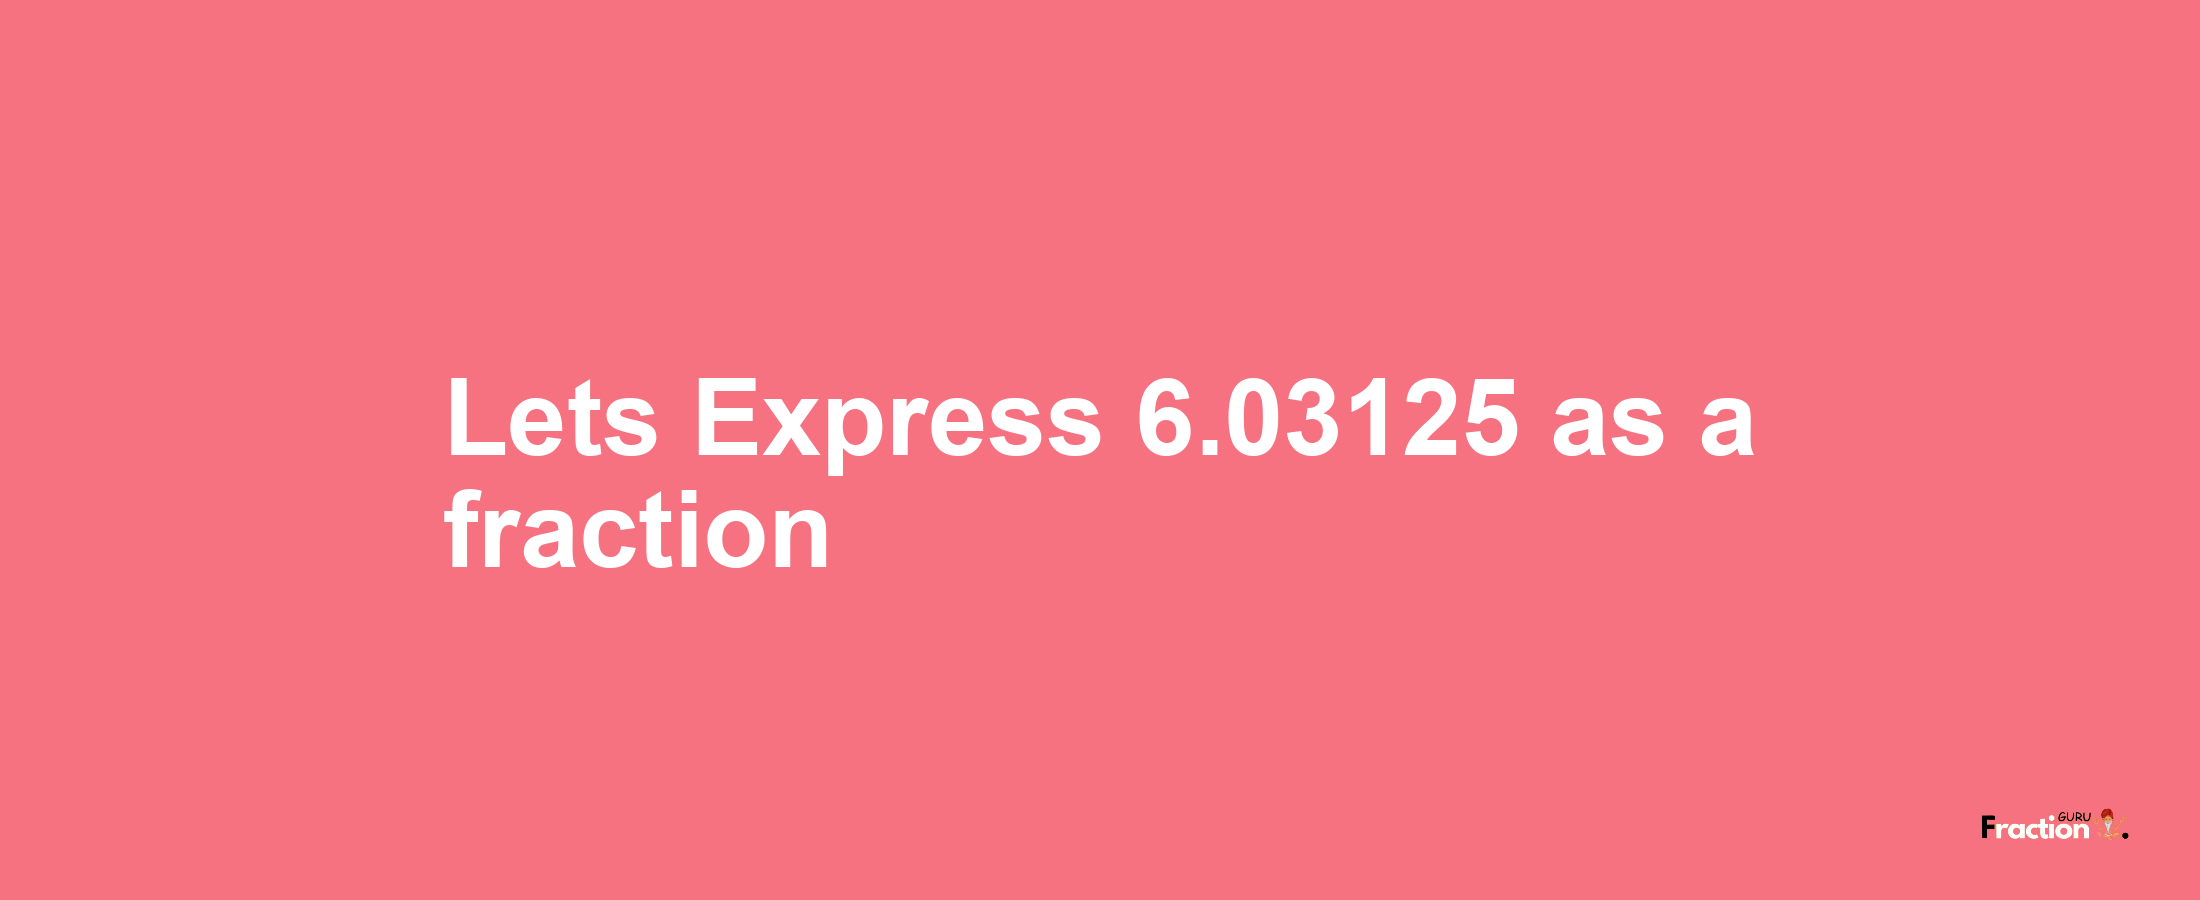 Lets Express 6.03125 as afraction